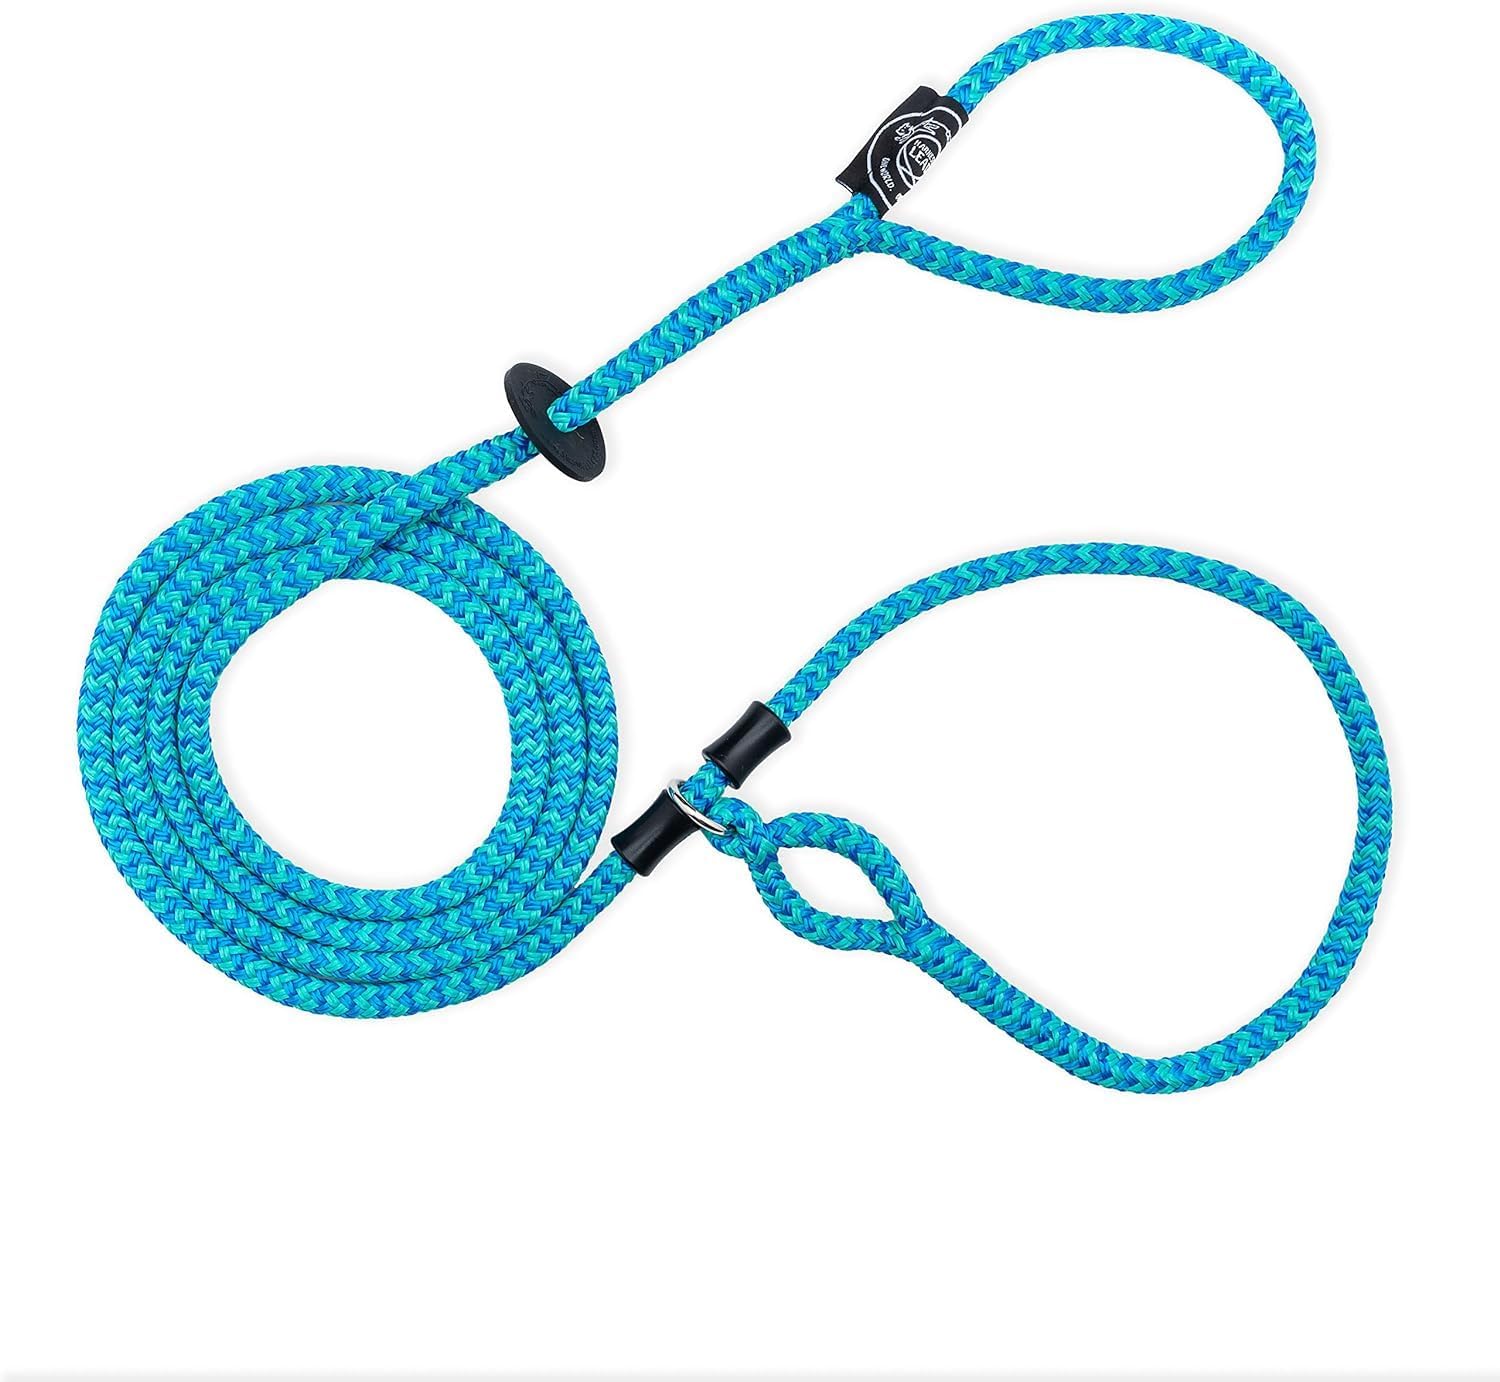 Harness Lead No Pull Dog Harness and Leash Set, Anti Pull Dog Harness for All Breeds and Sizes, One-Piece Cushioned Rope Design Safely Prevents Escaping and Pulling (Medium/Large, Blue/Multi)